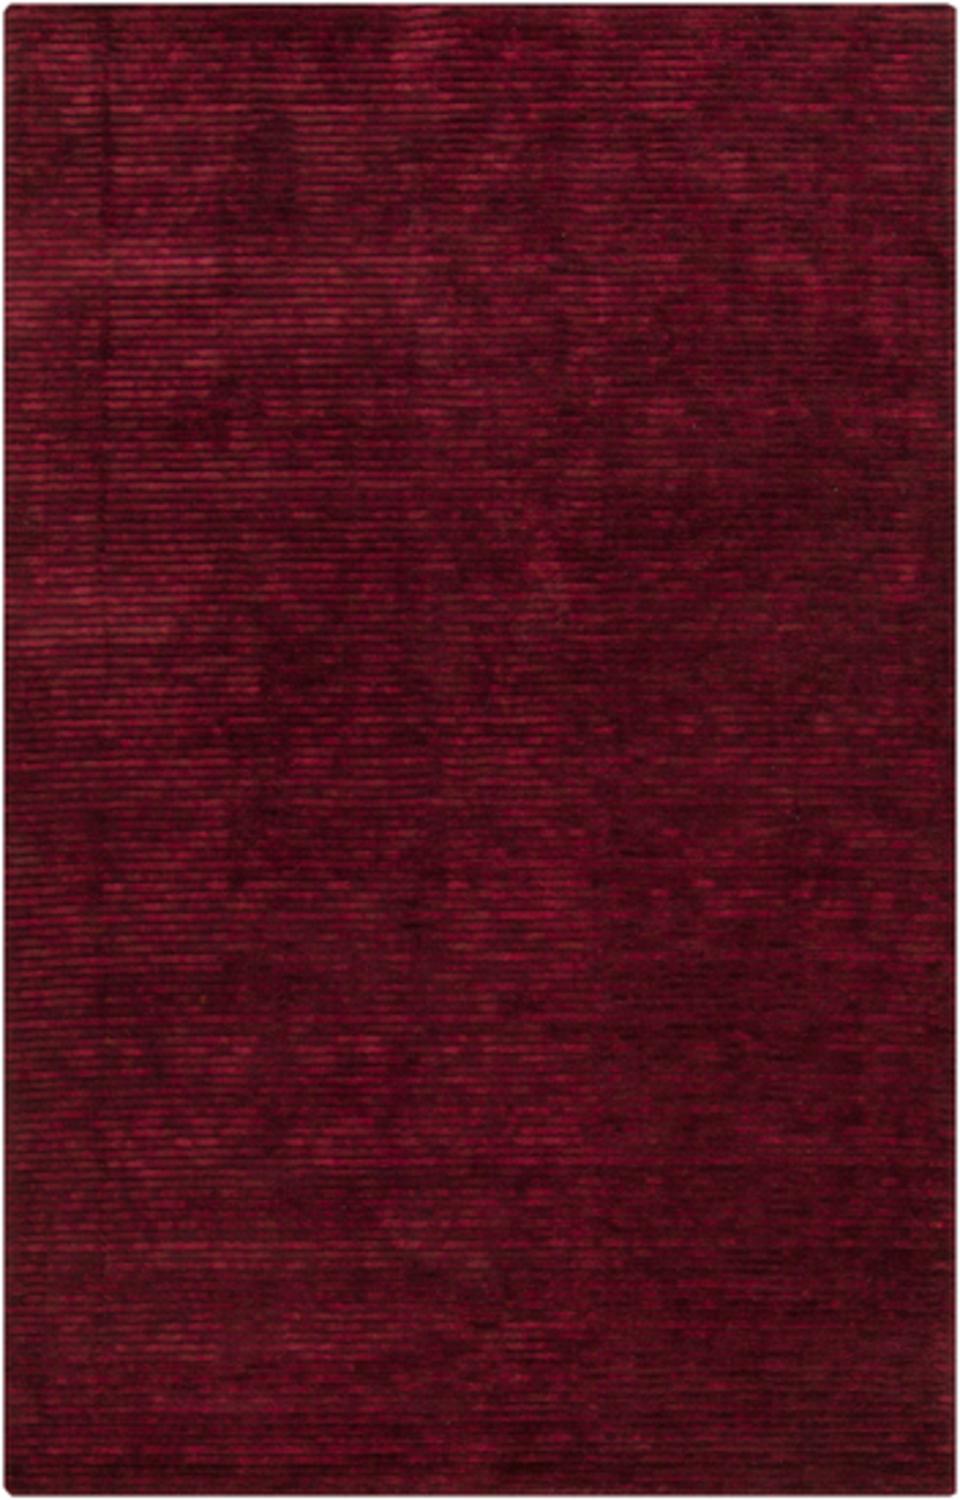 Diva At Home 8' x 11' Earthy Serenity Cranberry Red Hand Woven Wool Area Throw Rug